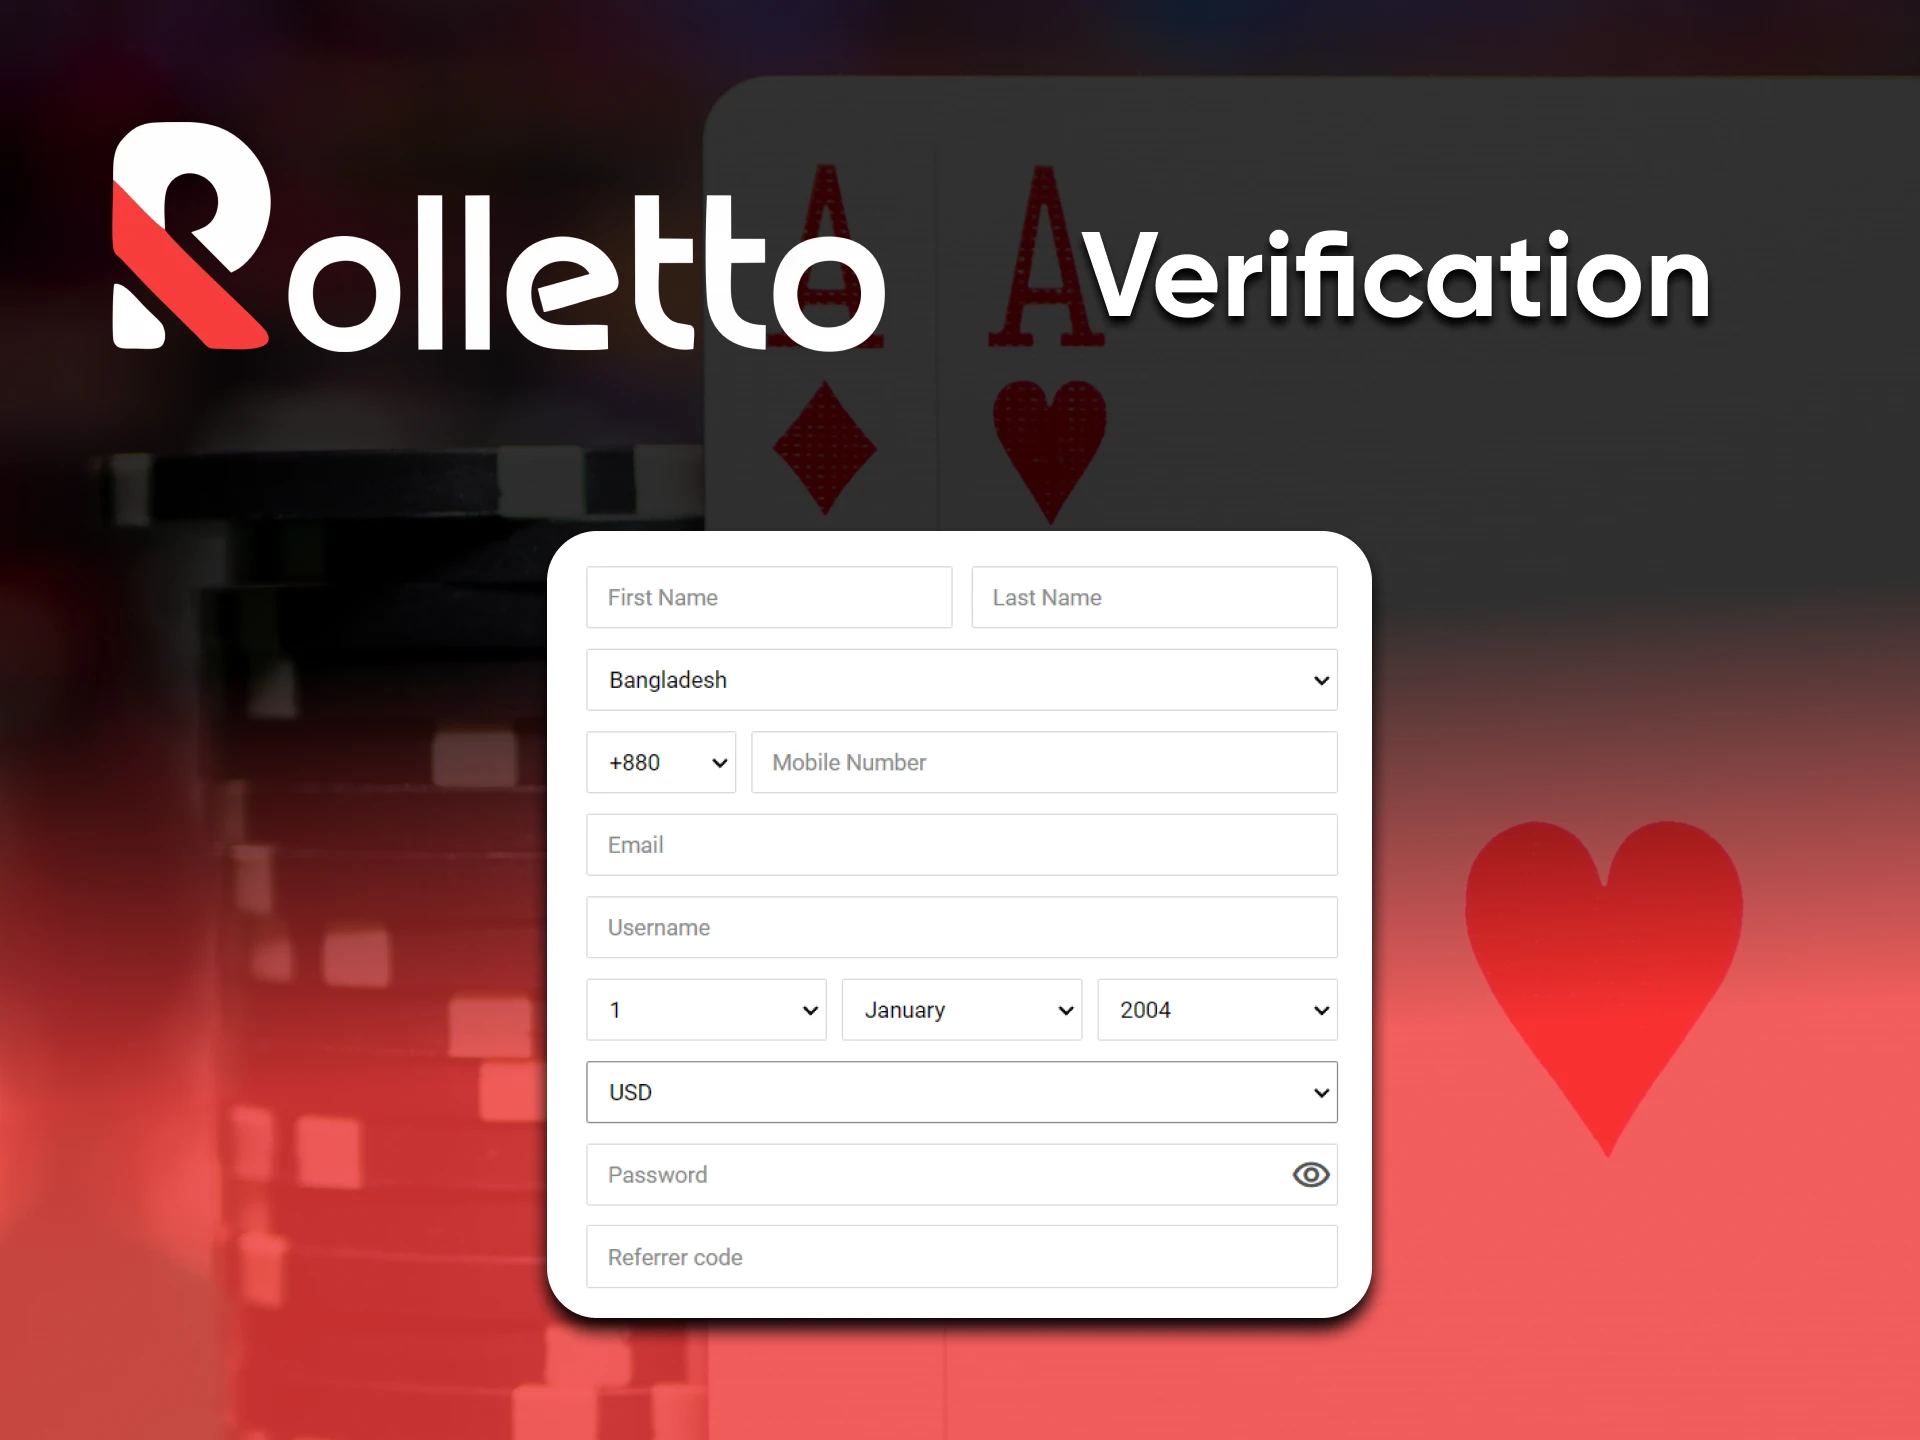 Create an account and fill in the data for playing games in the casino from Rolletto.